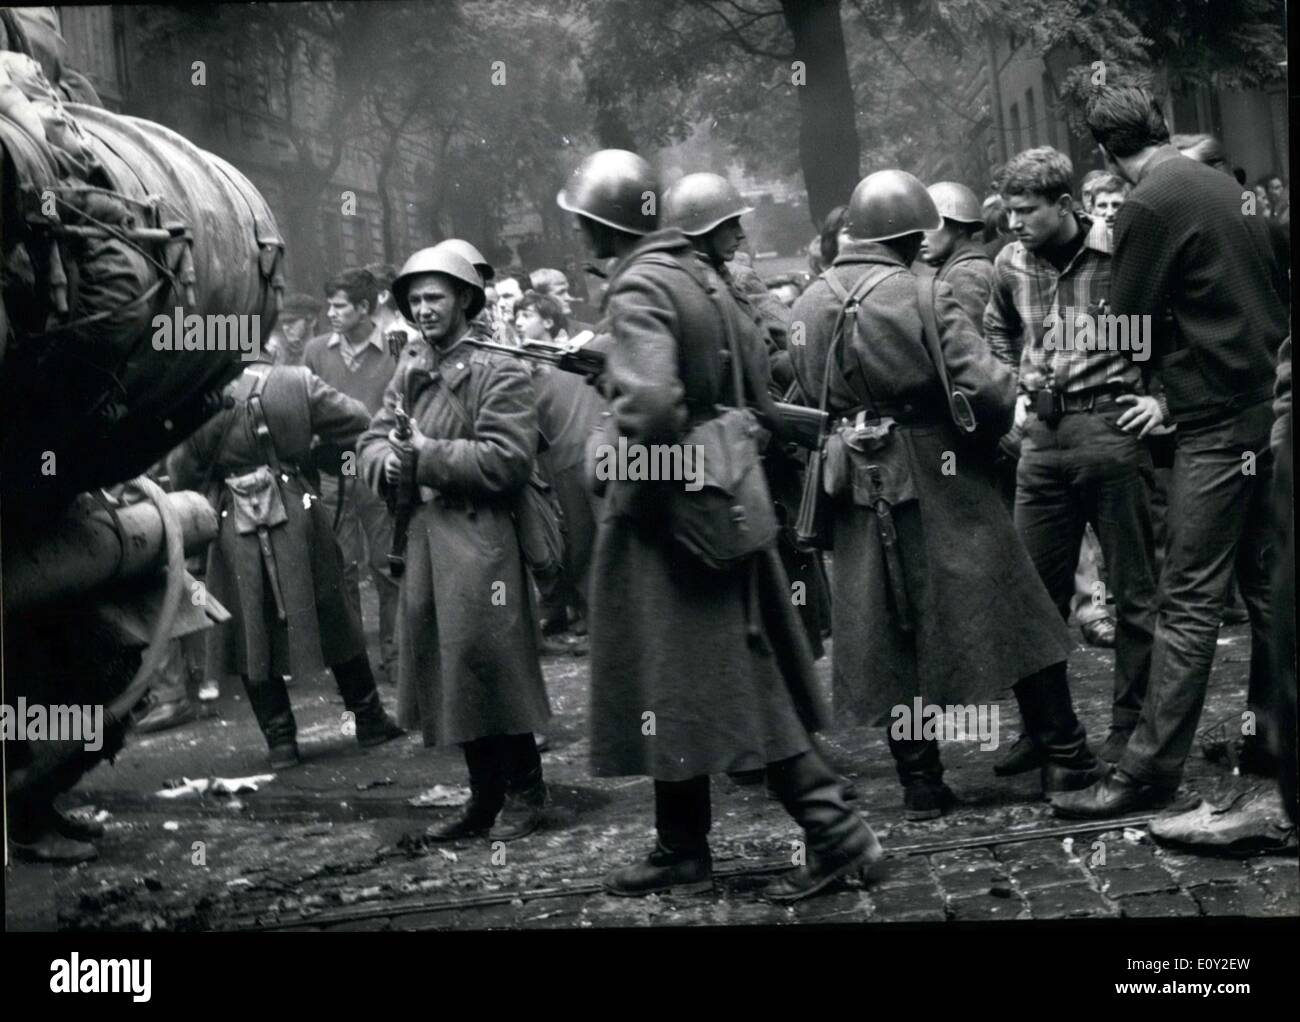 Aug. 24, 1968 - These Soviet occupation troops are in Prague. A passive resistance had developed. Since no one was rioting, these troops had no choice but to stand around their tanks and just look at the people. Stock Photo